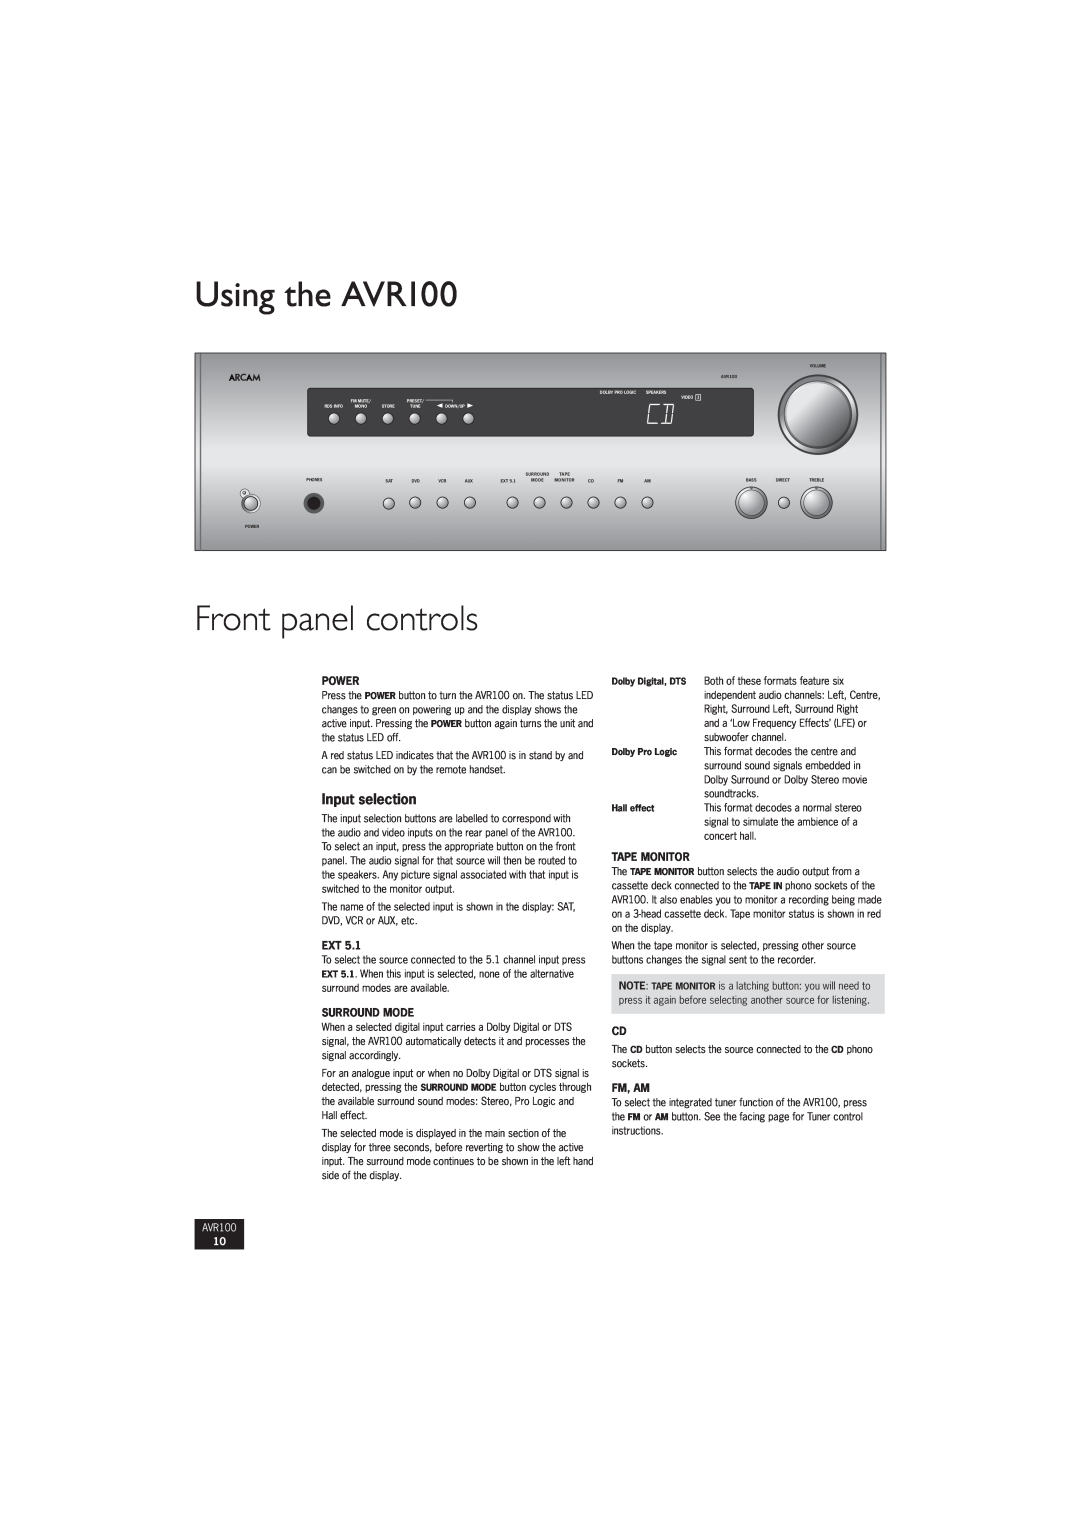 Arcam manual Using the AVR100, Front panel controls, Input selection, Power, Surround Mode, Tape Monitor, Fm, Am 